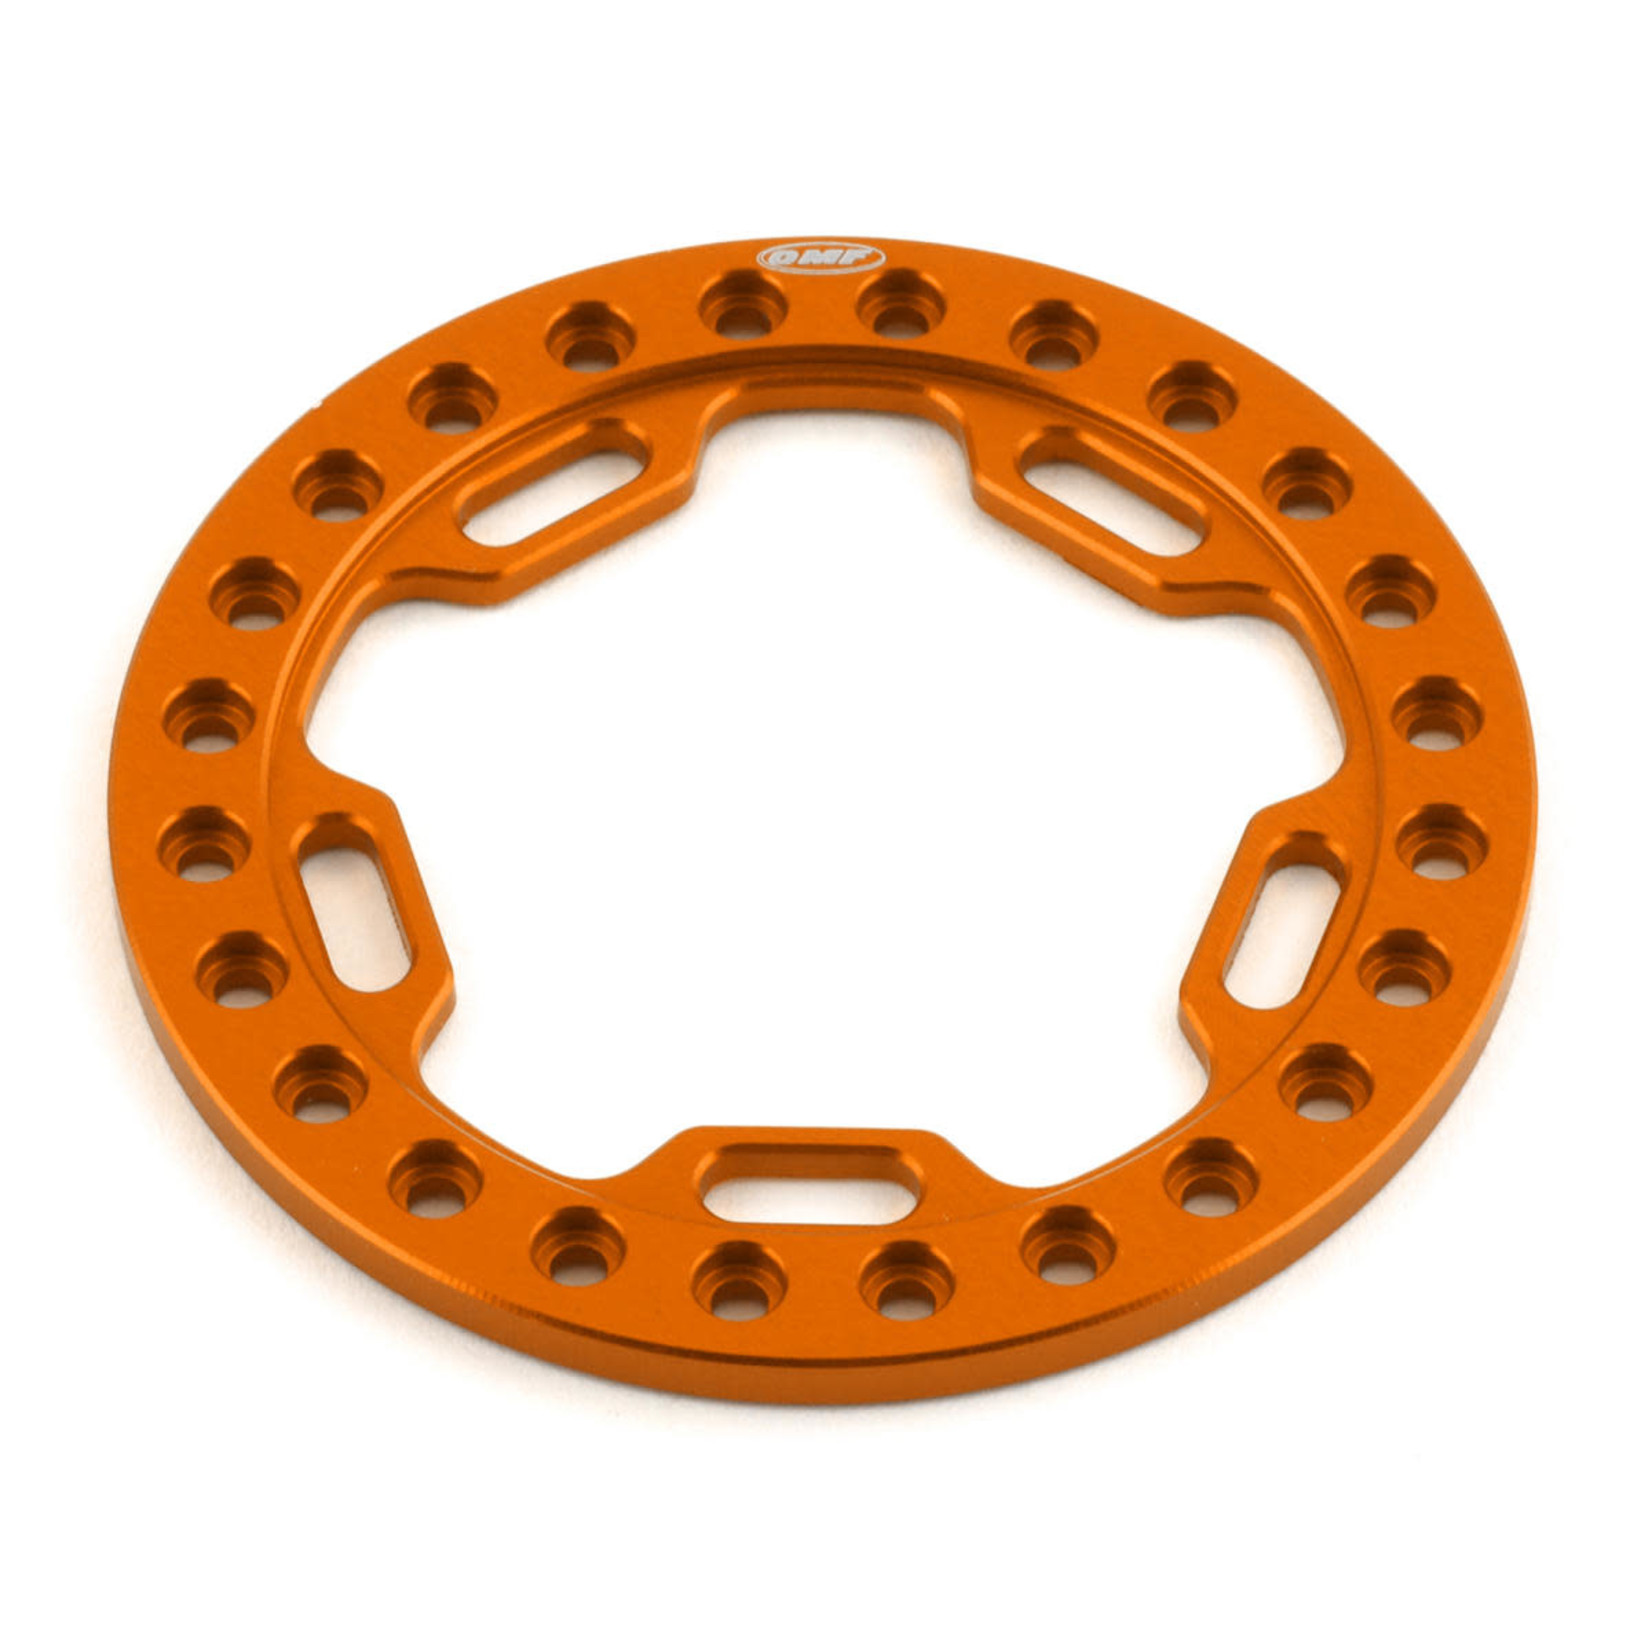 Vanquish Products Vanquish Products OMF 1.9" Phase 5 Beadlock Rings (Orange) #VPS05115